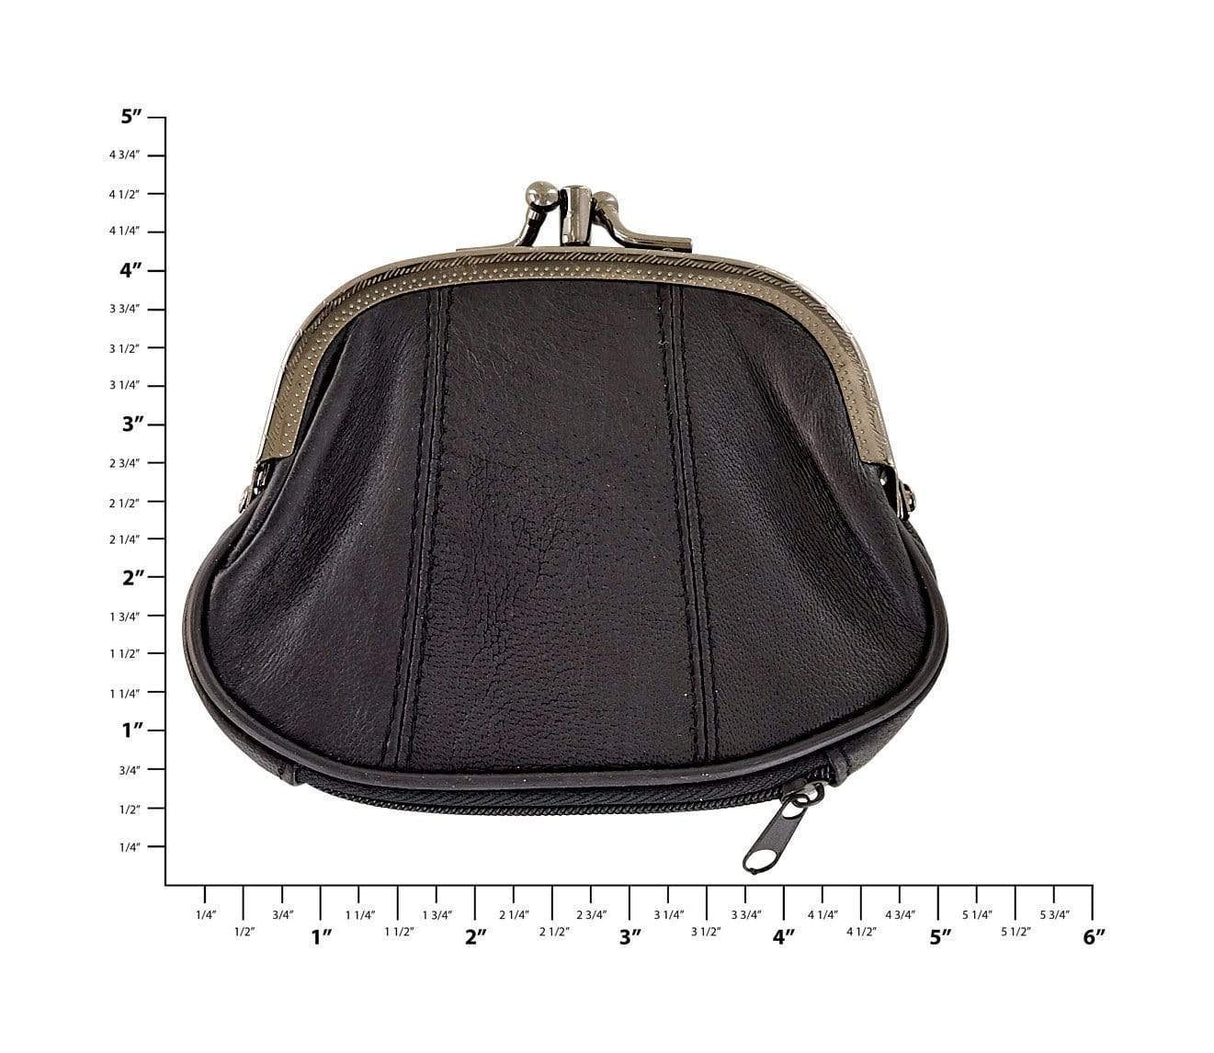 Ohio Travel Bag Novelty & Gift 4" Black, Double Coin Purse, Leather, #M-1549-BLK M-1549-BLK